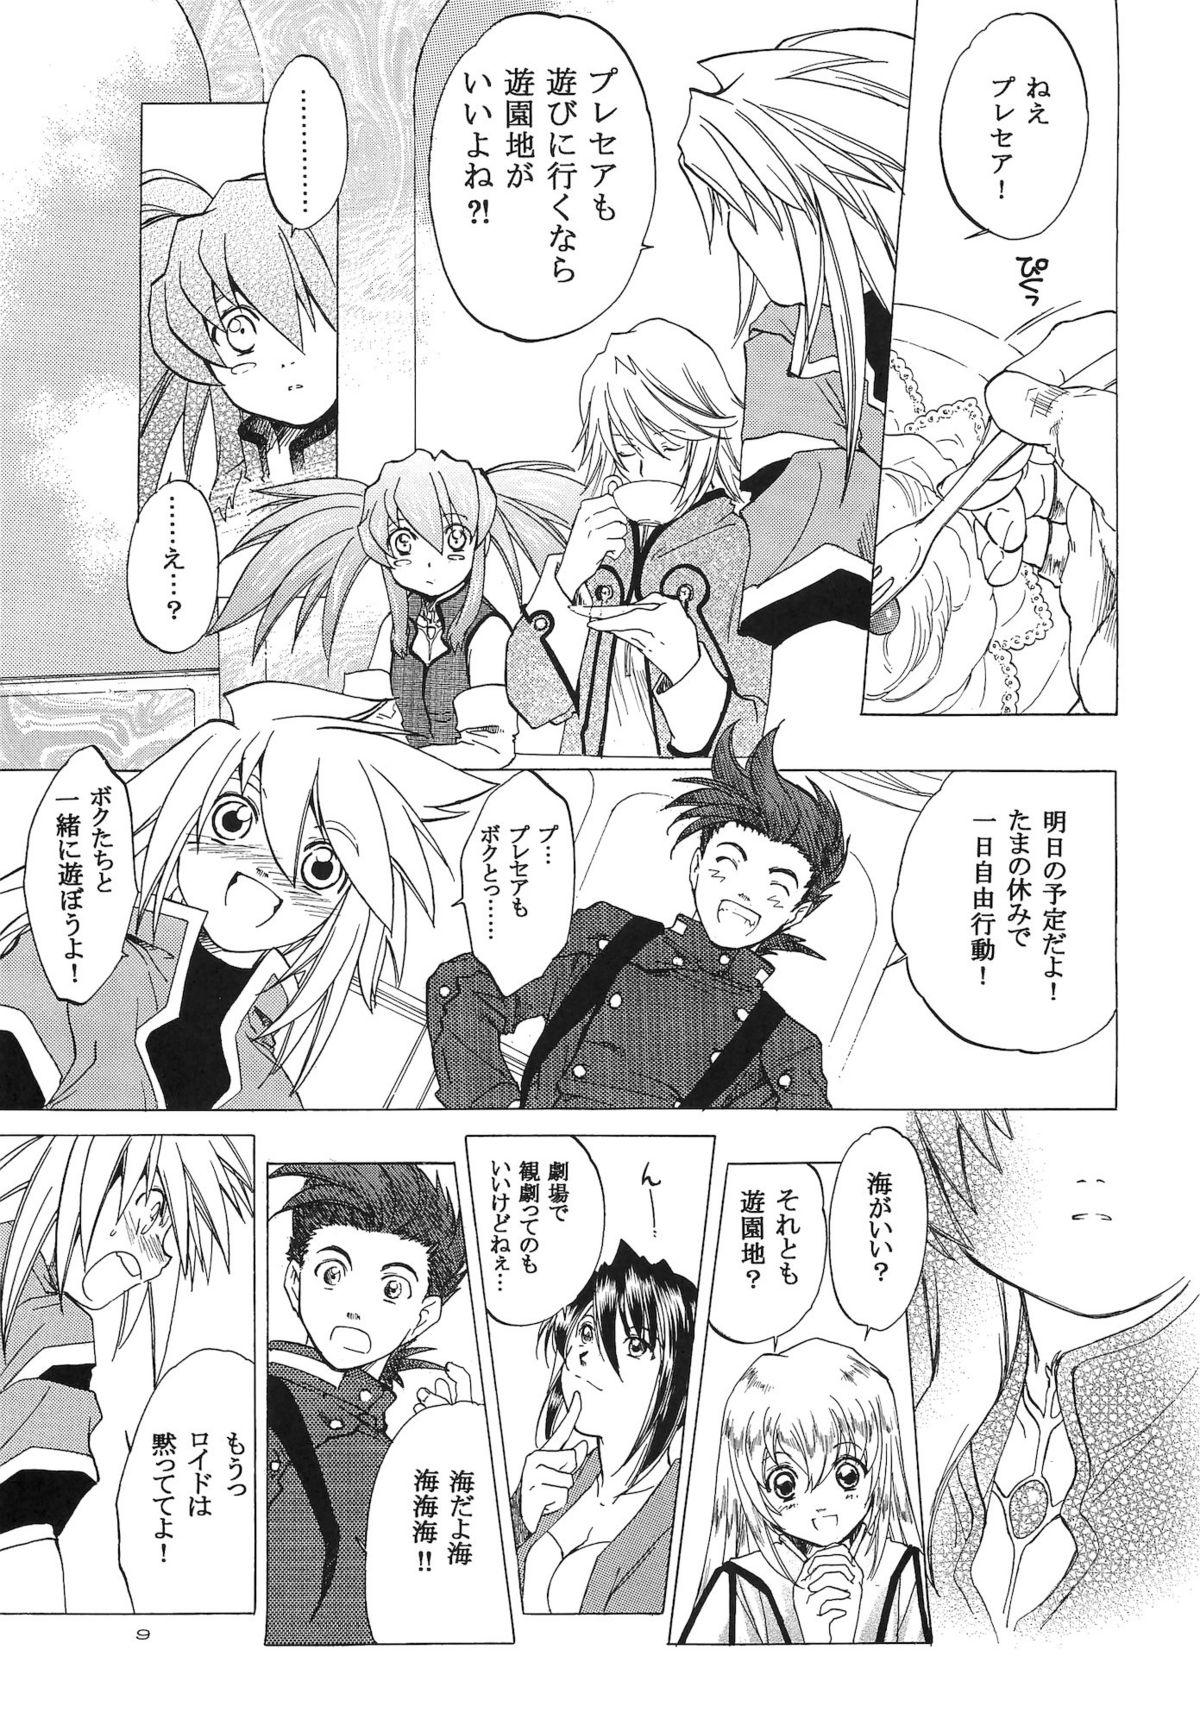 Webcams RPxZS - Tales of symphonia Thylinh - Page 8